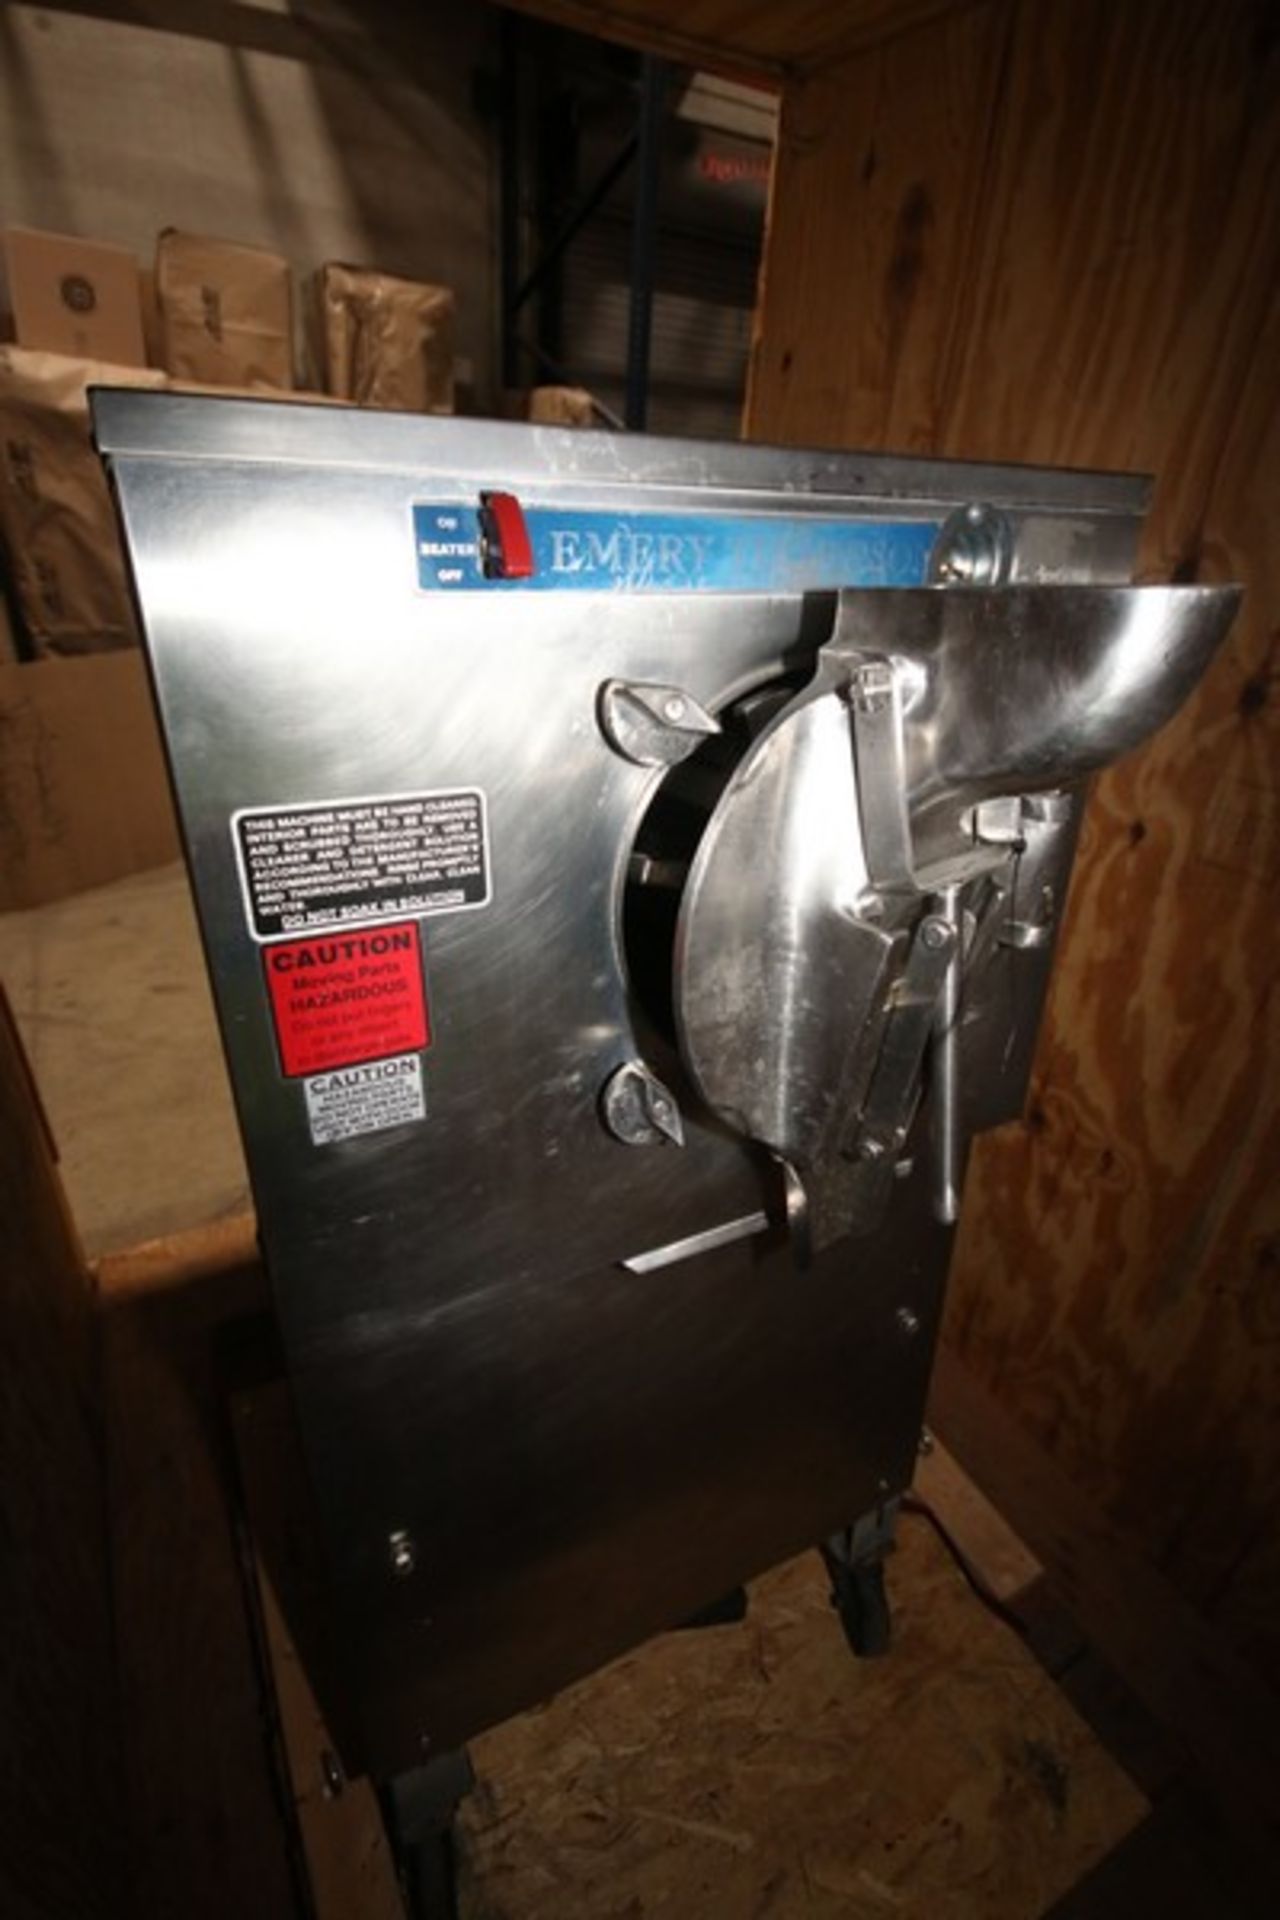 Energy Thompson S/S Ice Cream Freezer, M/N 309, S/N 3500, 280/230 Volts, 3 Phase, Mounted on - Image 2 of 8